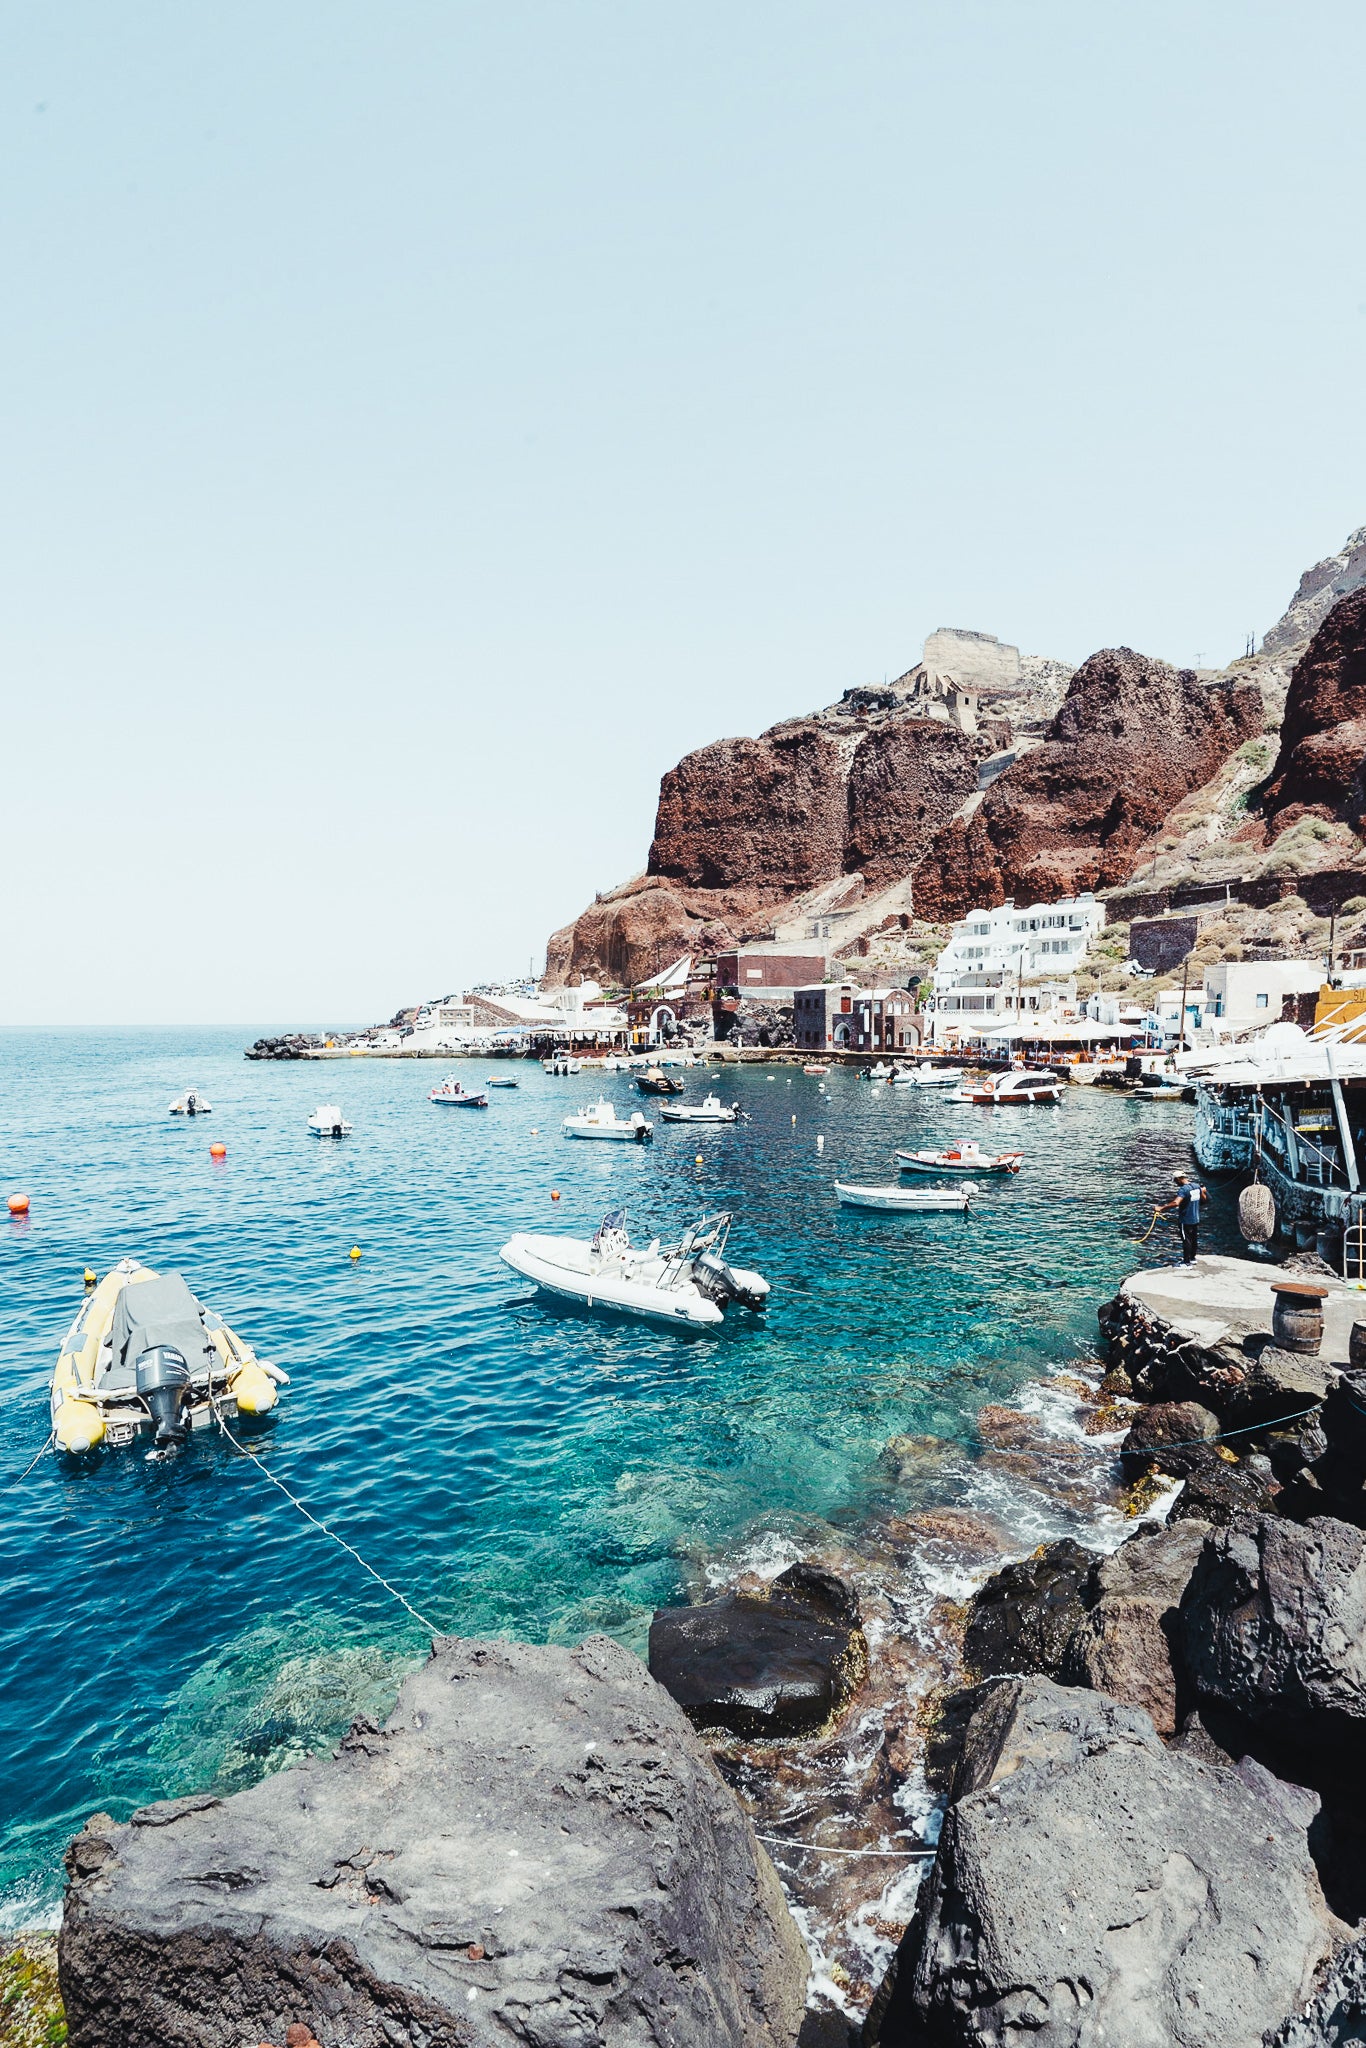 The bay and port of Amoudi is located on the northwestern tip of the island of Santorini, on the seafront below the town of Oia. The white buildings of the Amoudi town built into the blood-red slope of the caldera cliff look very picturesque.